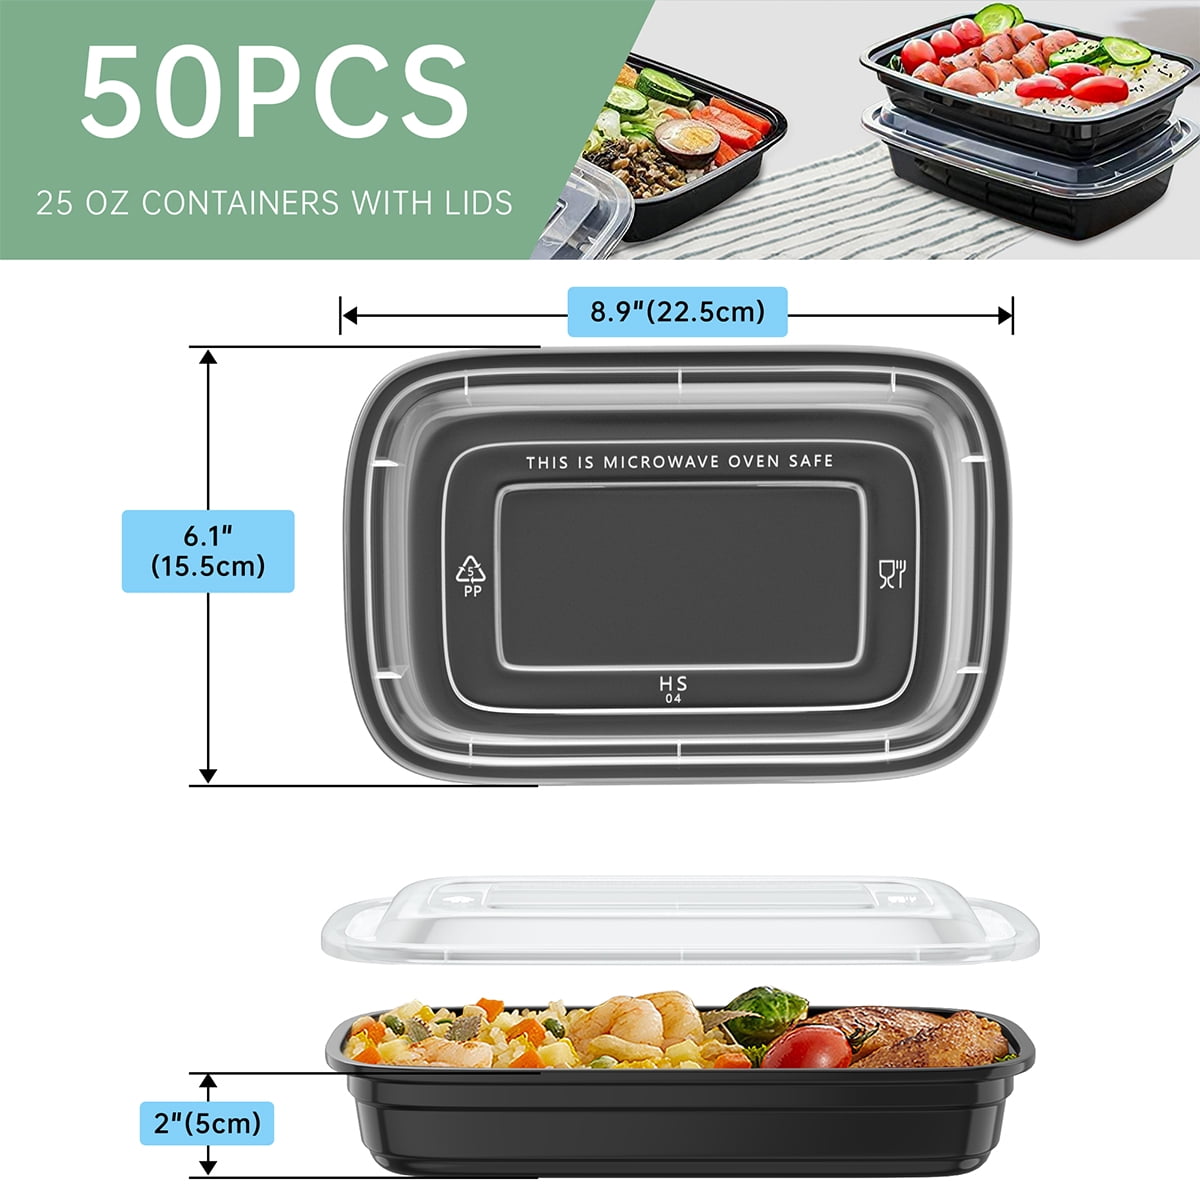 GoodCook Meal Prep Single Cavity Container - 30pk 30 ct